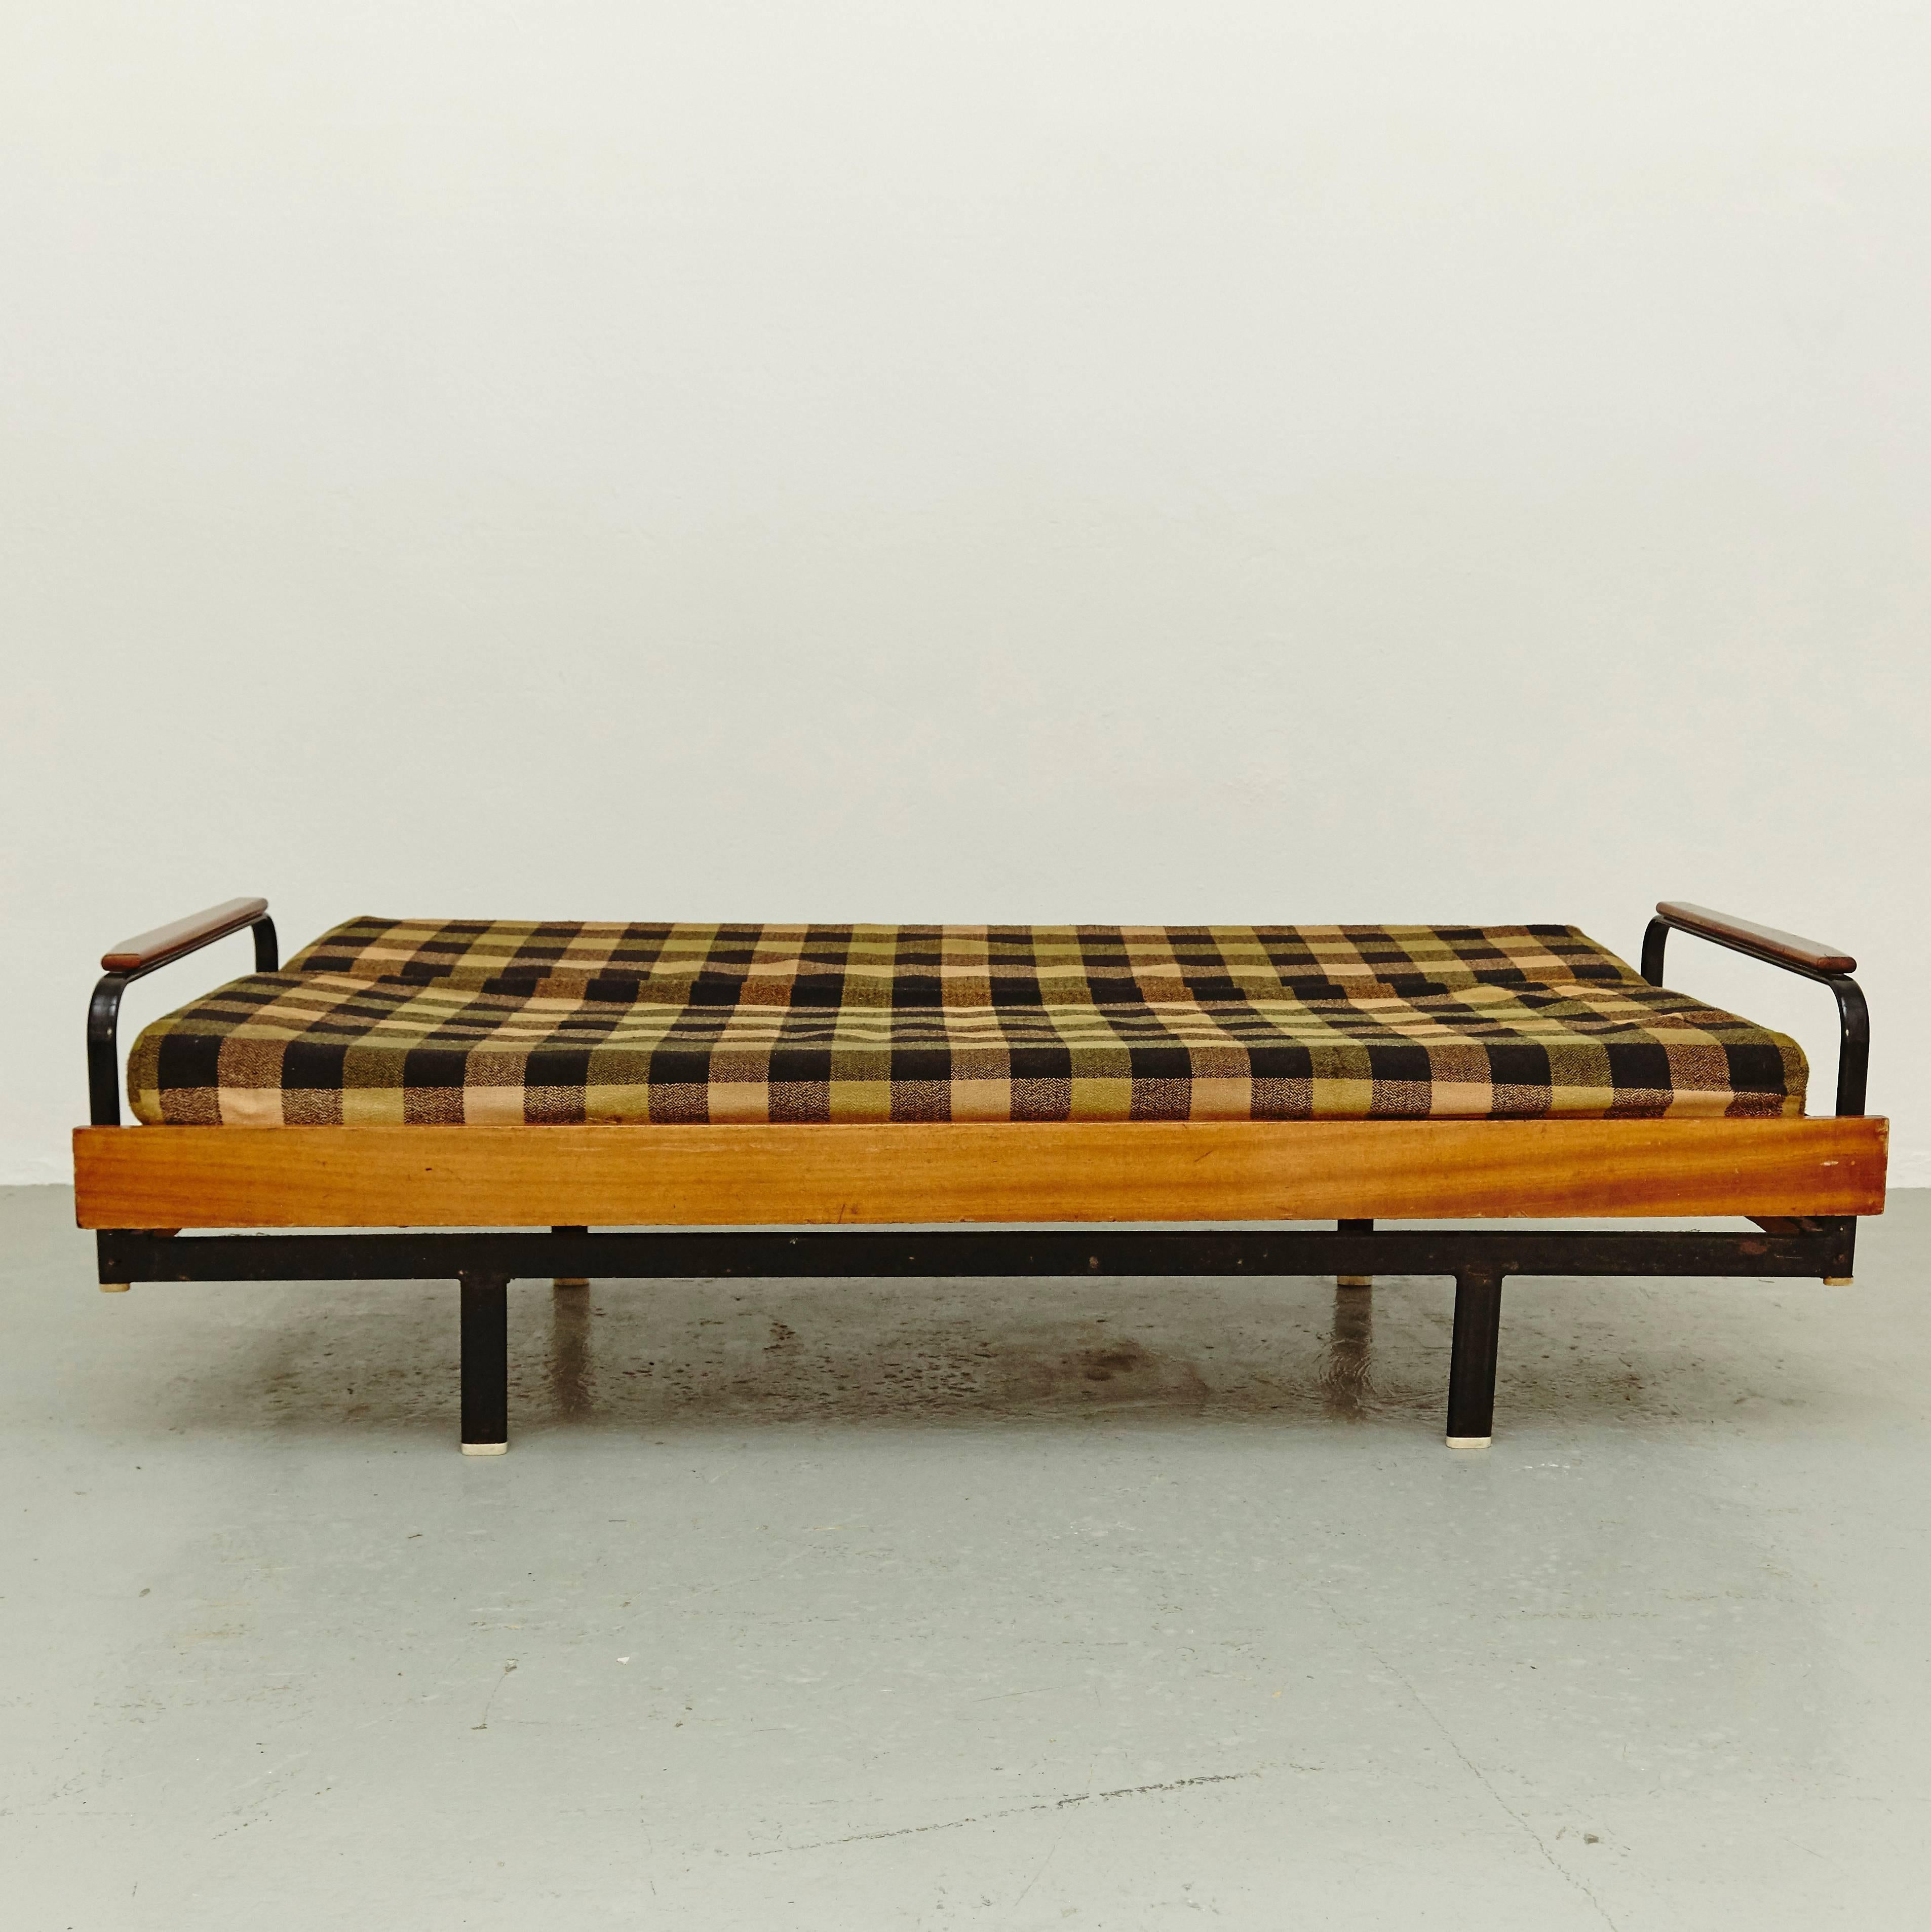 Mid-20th Century French Sofa After Jean Prouve, circa 1950